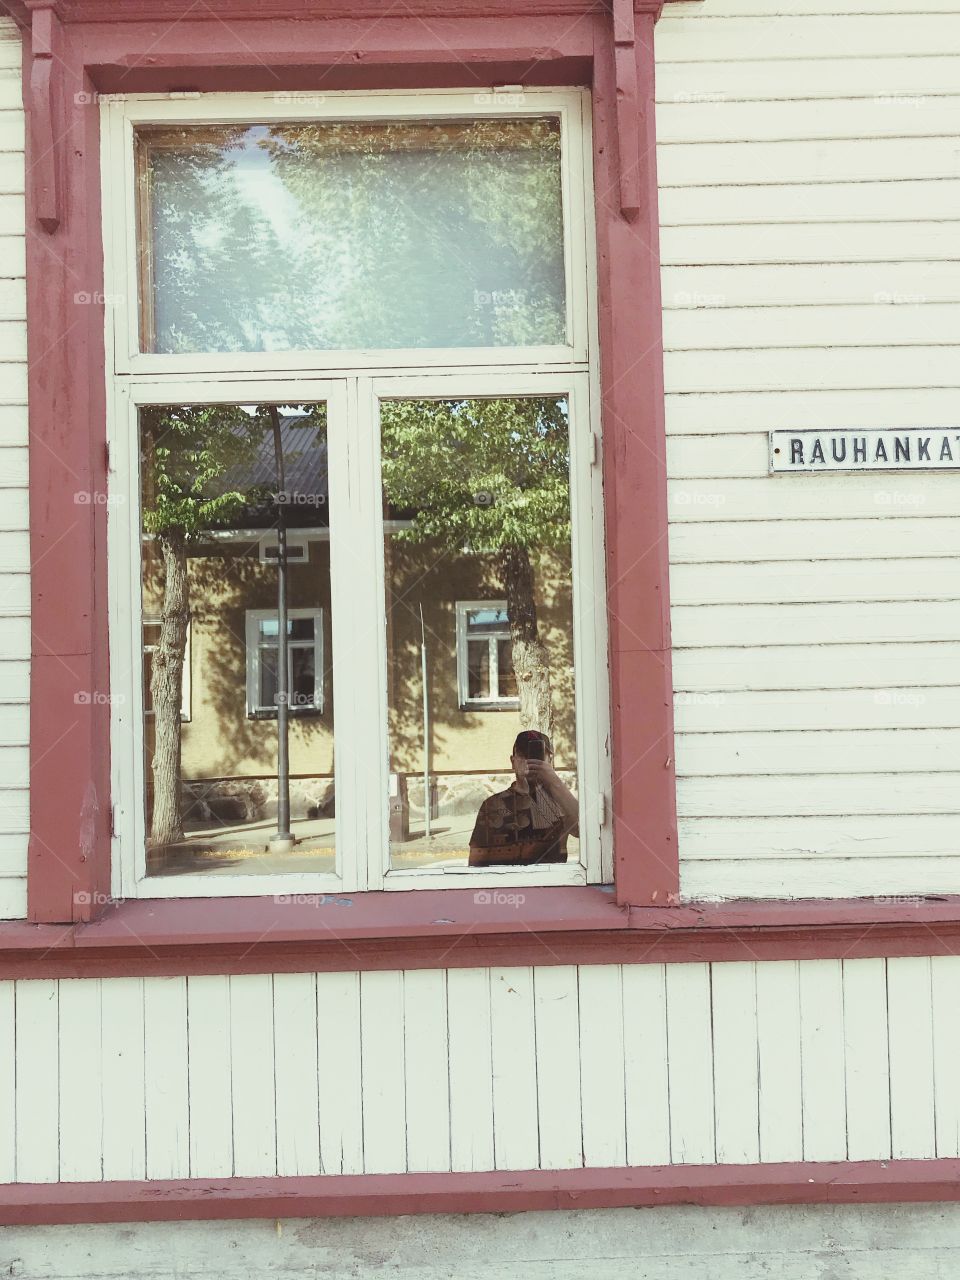 An attempt to make selfi in the window😁 Another ancient house on Rauhankatu in Hamina.September 2018. Suomi Finland 🇫🇮.